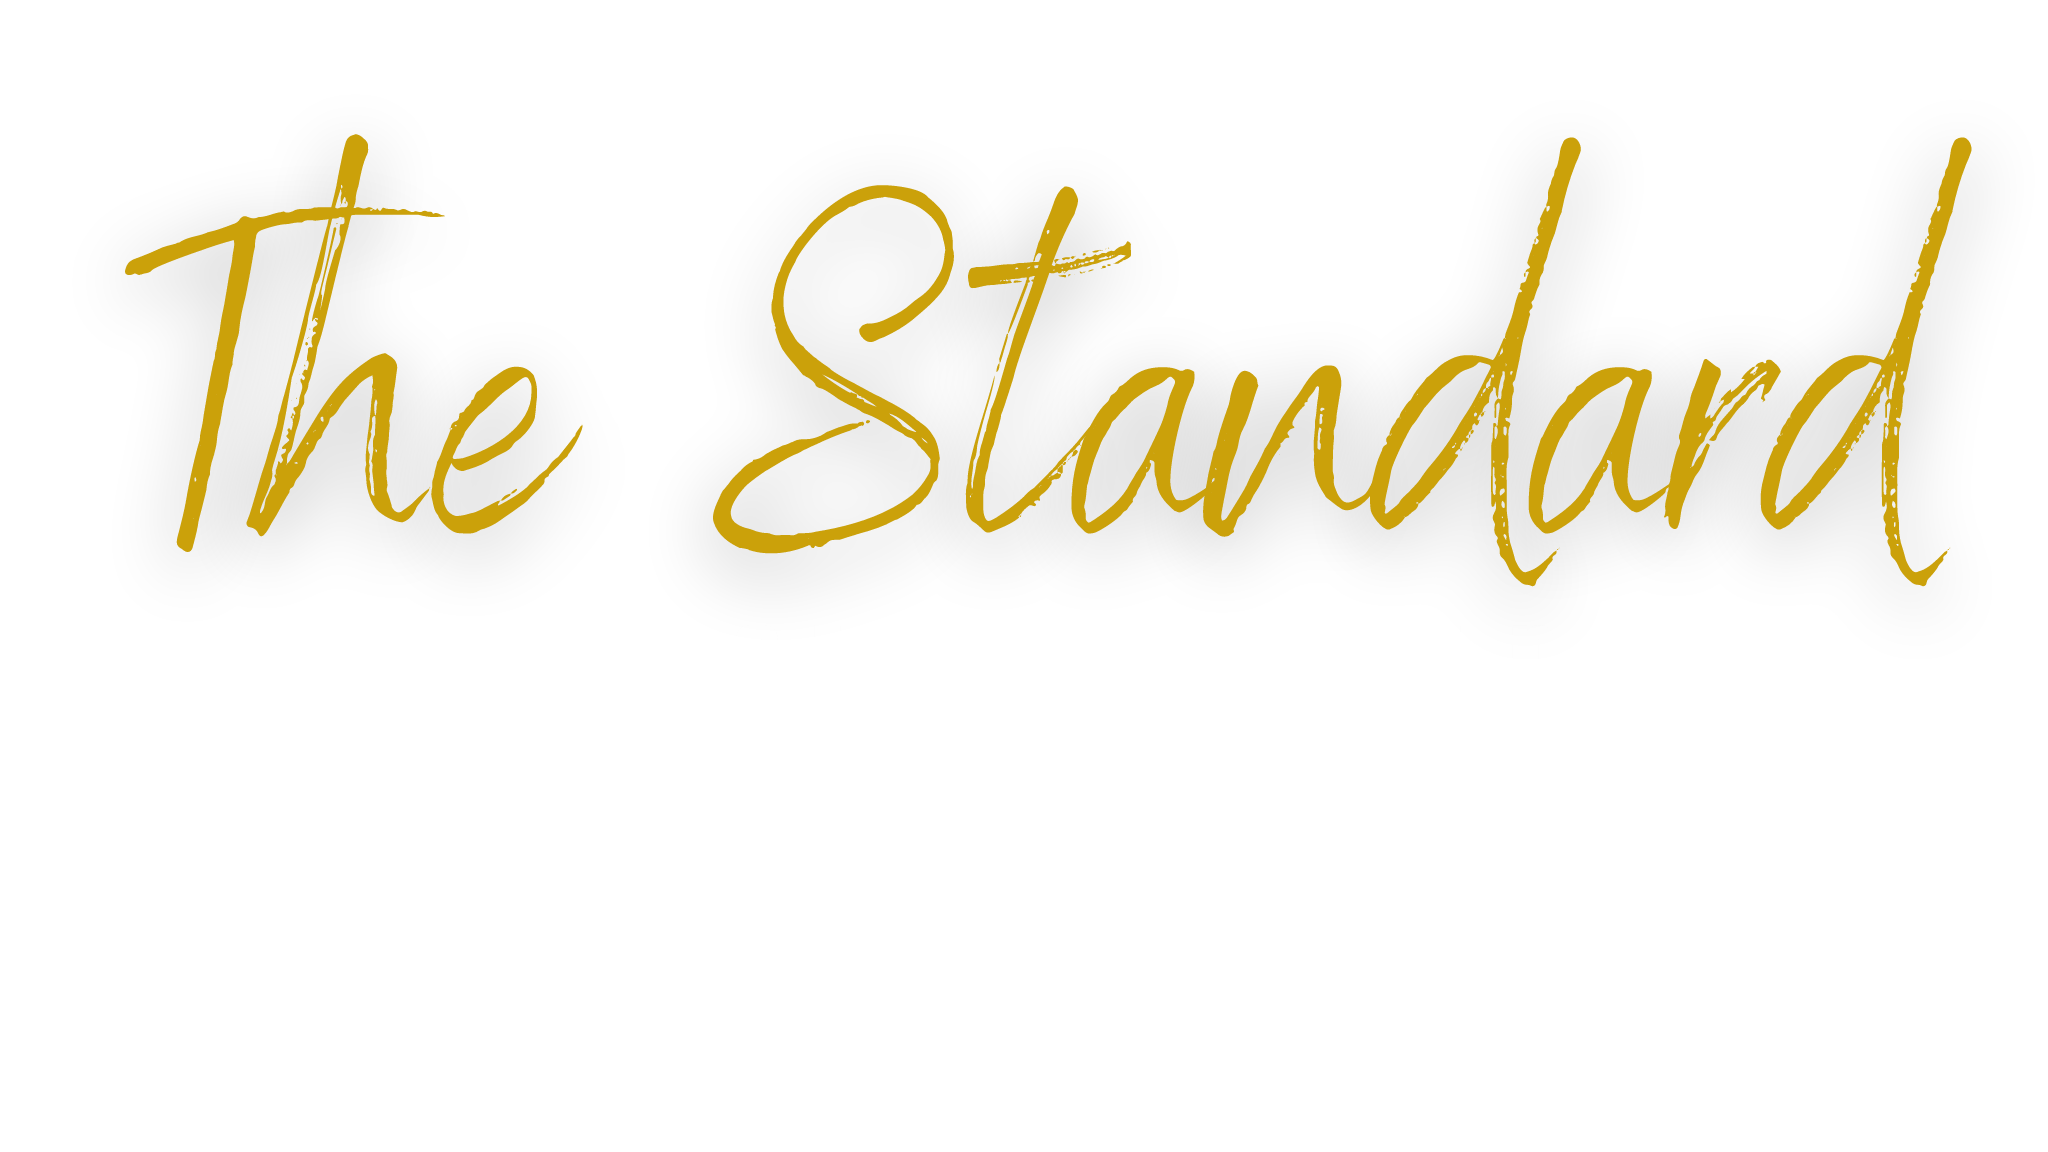 the standard is a community for leaders to connect and grow with one another.